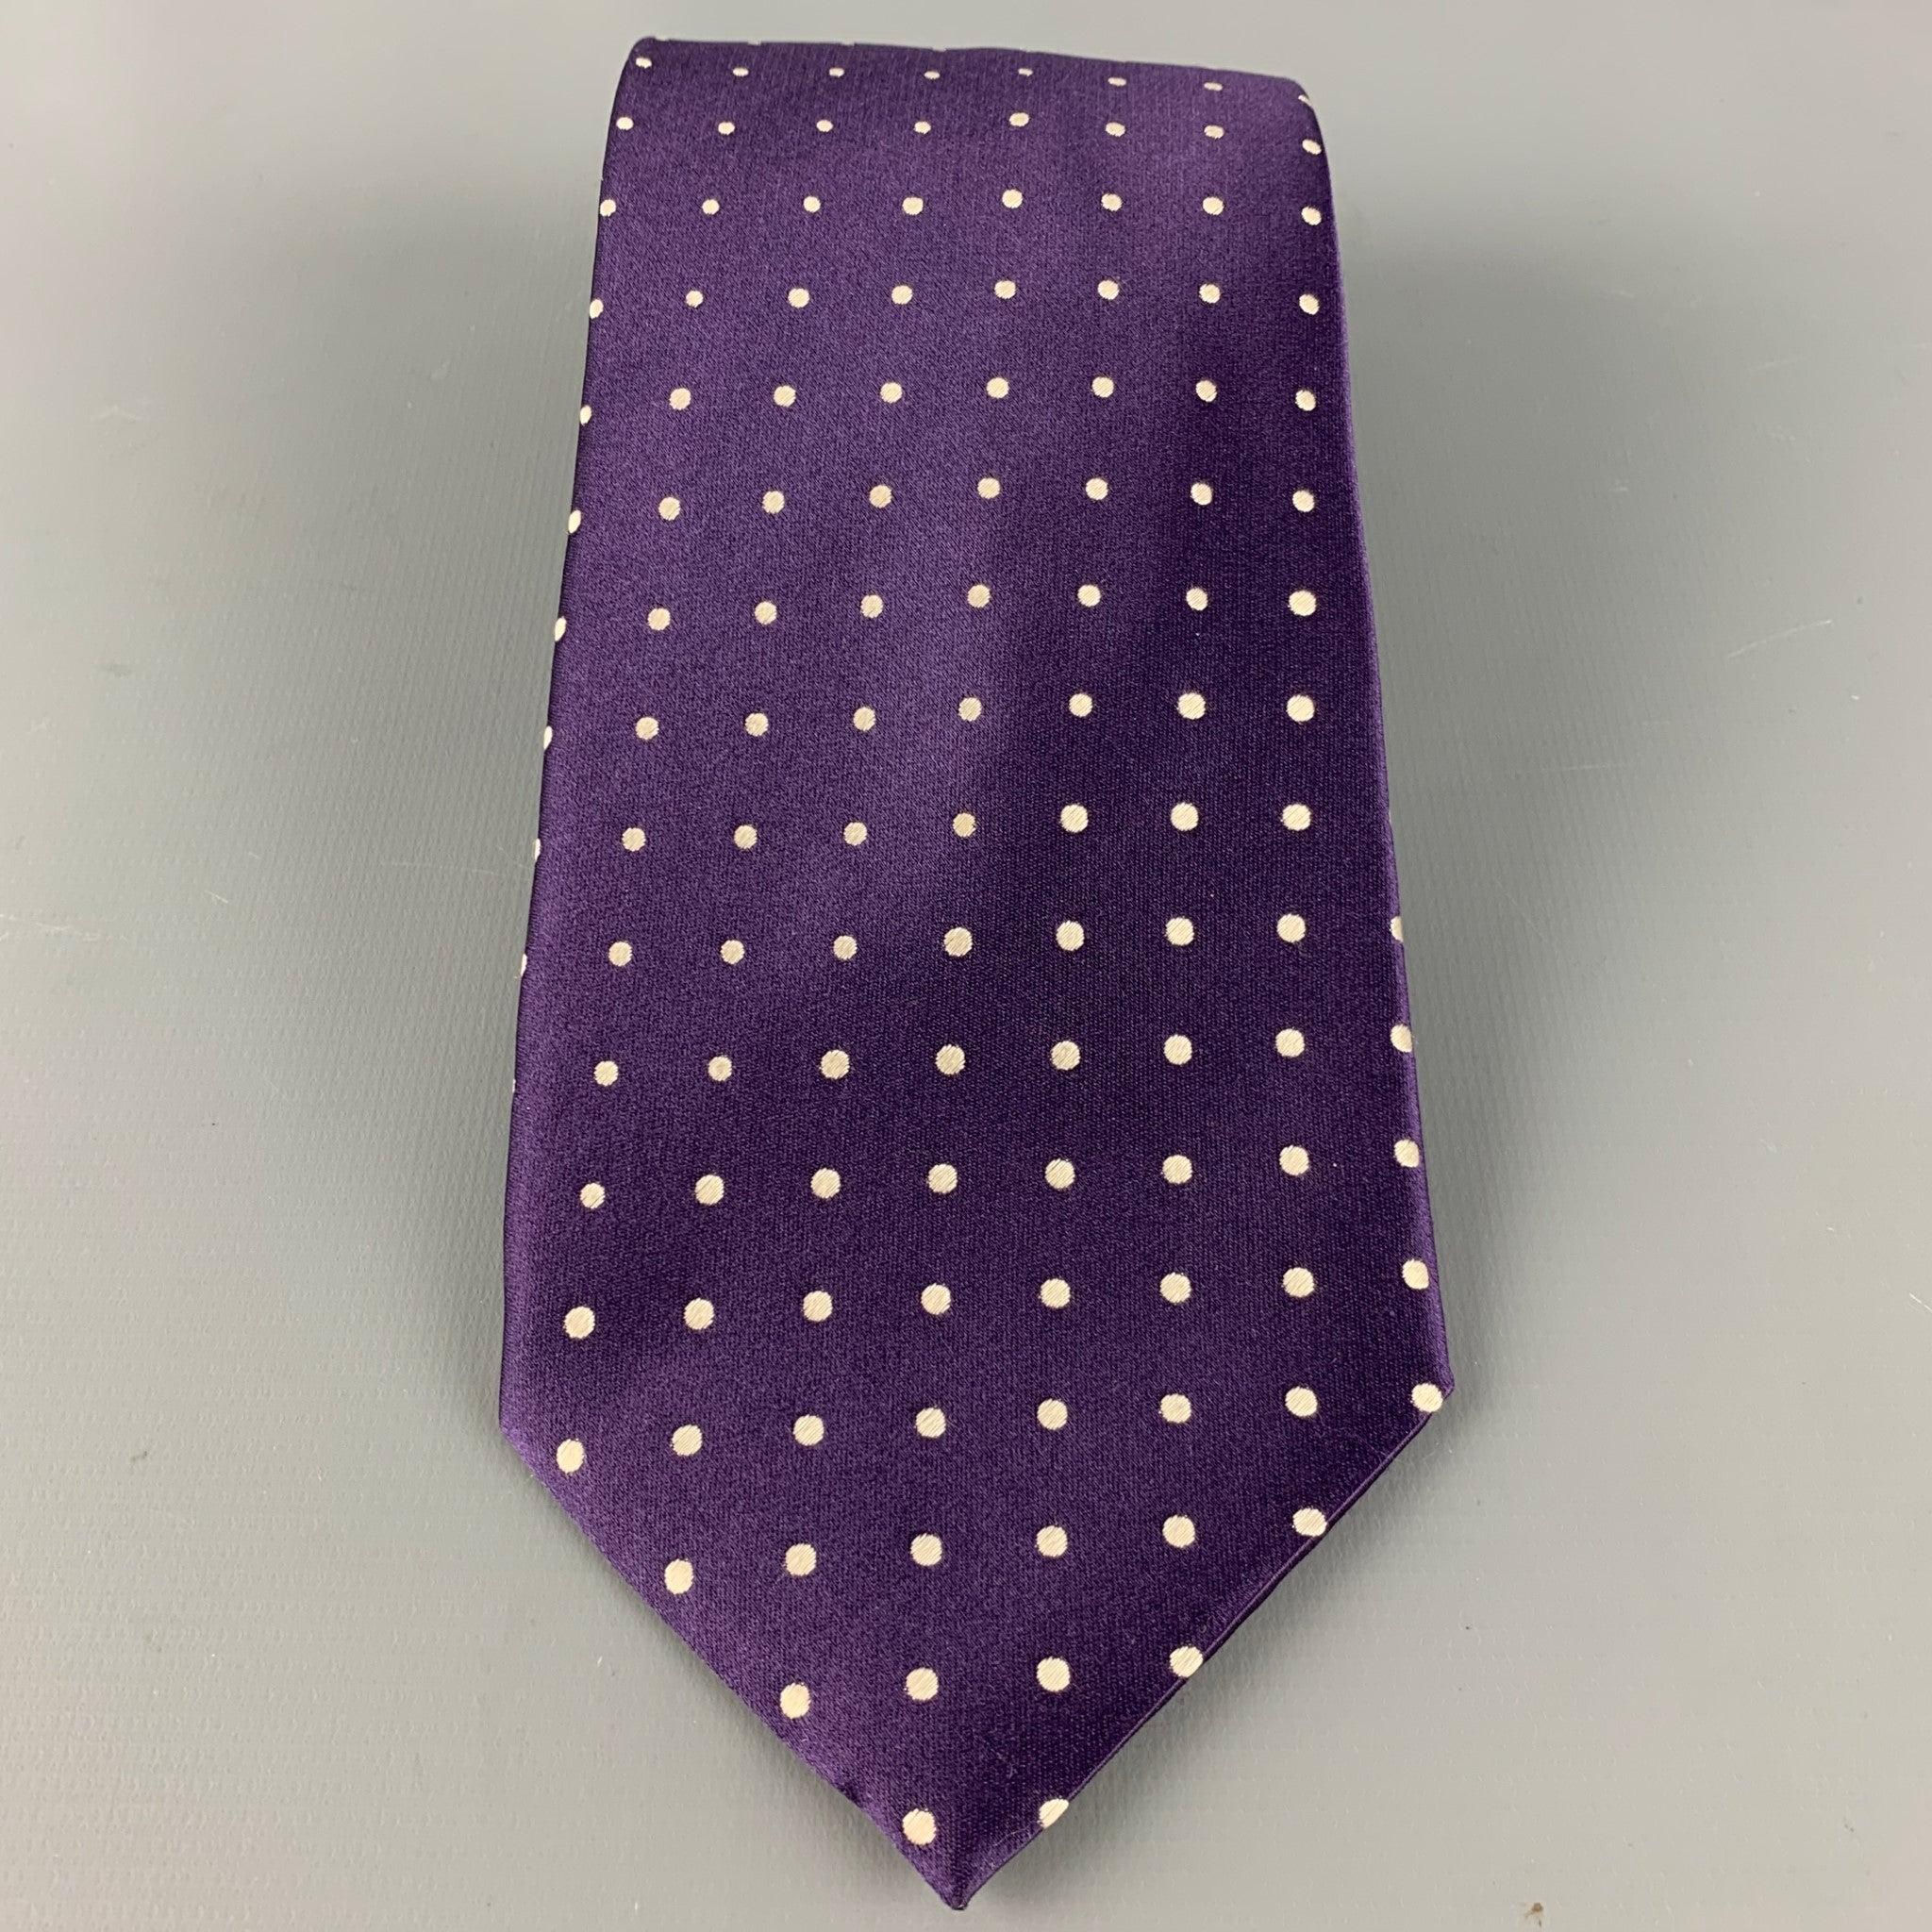 GIORGIO ARMANI tie in purple silk satin, featuring an all over white dots pattern. Handmade in Italy.Very Good Pre-Owned Condition. 

Measurements: 
  Width: 4 inches Length: 62 inches 
  
  
 
Reference: 126584
Category: Tie
More Details
   